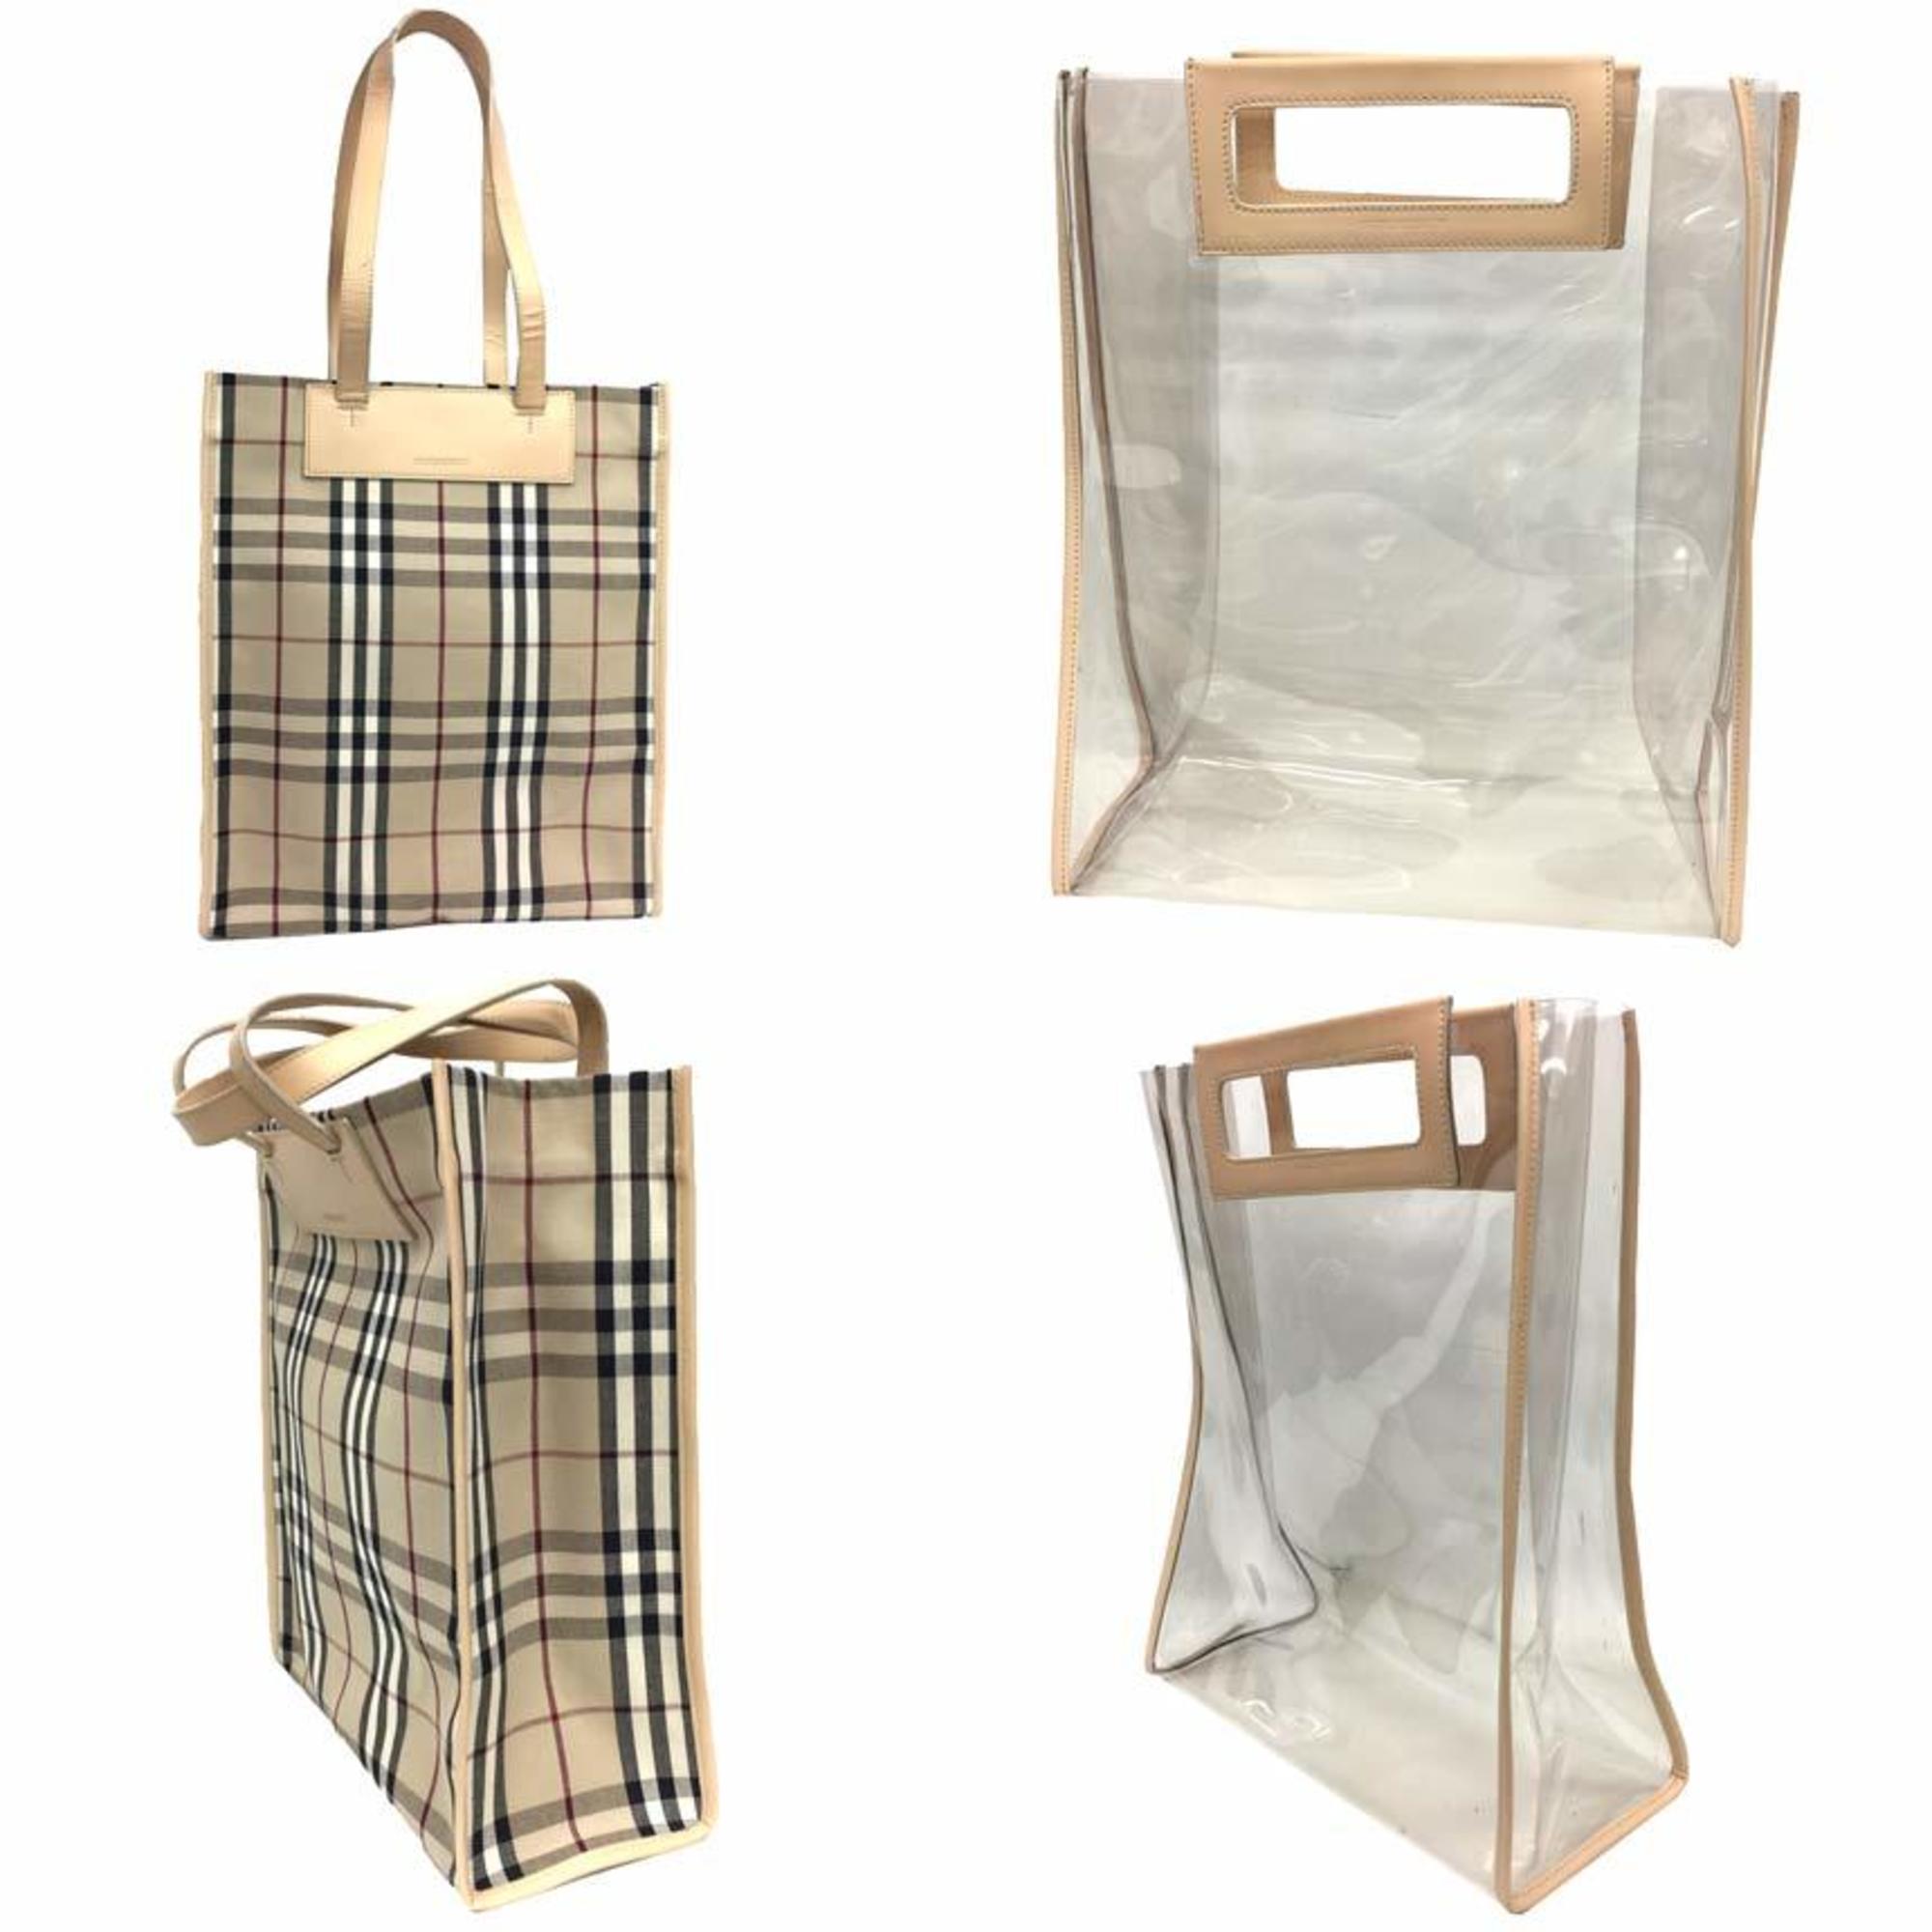 Burberry BURBERRY Clear Tote Bag 3WAY Check aq8668